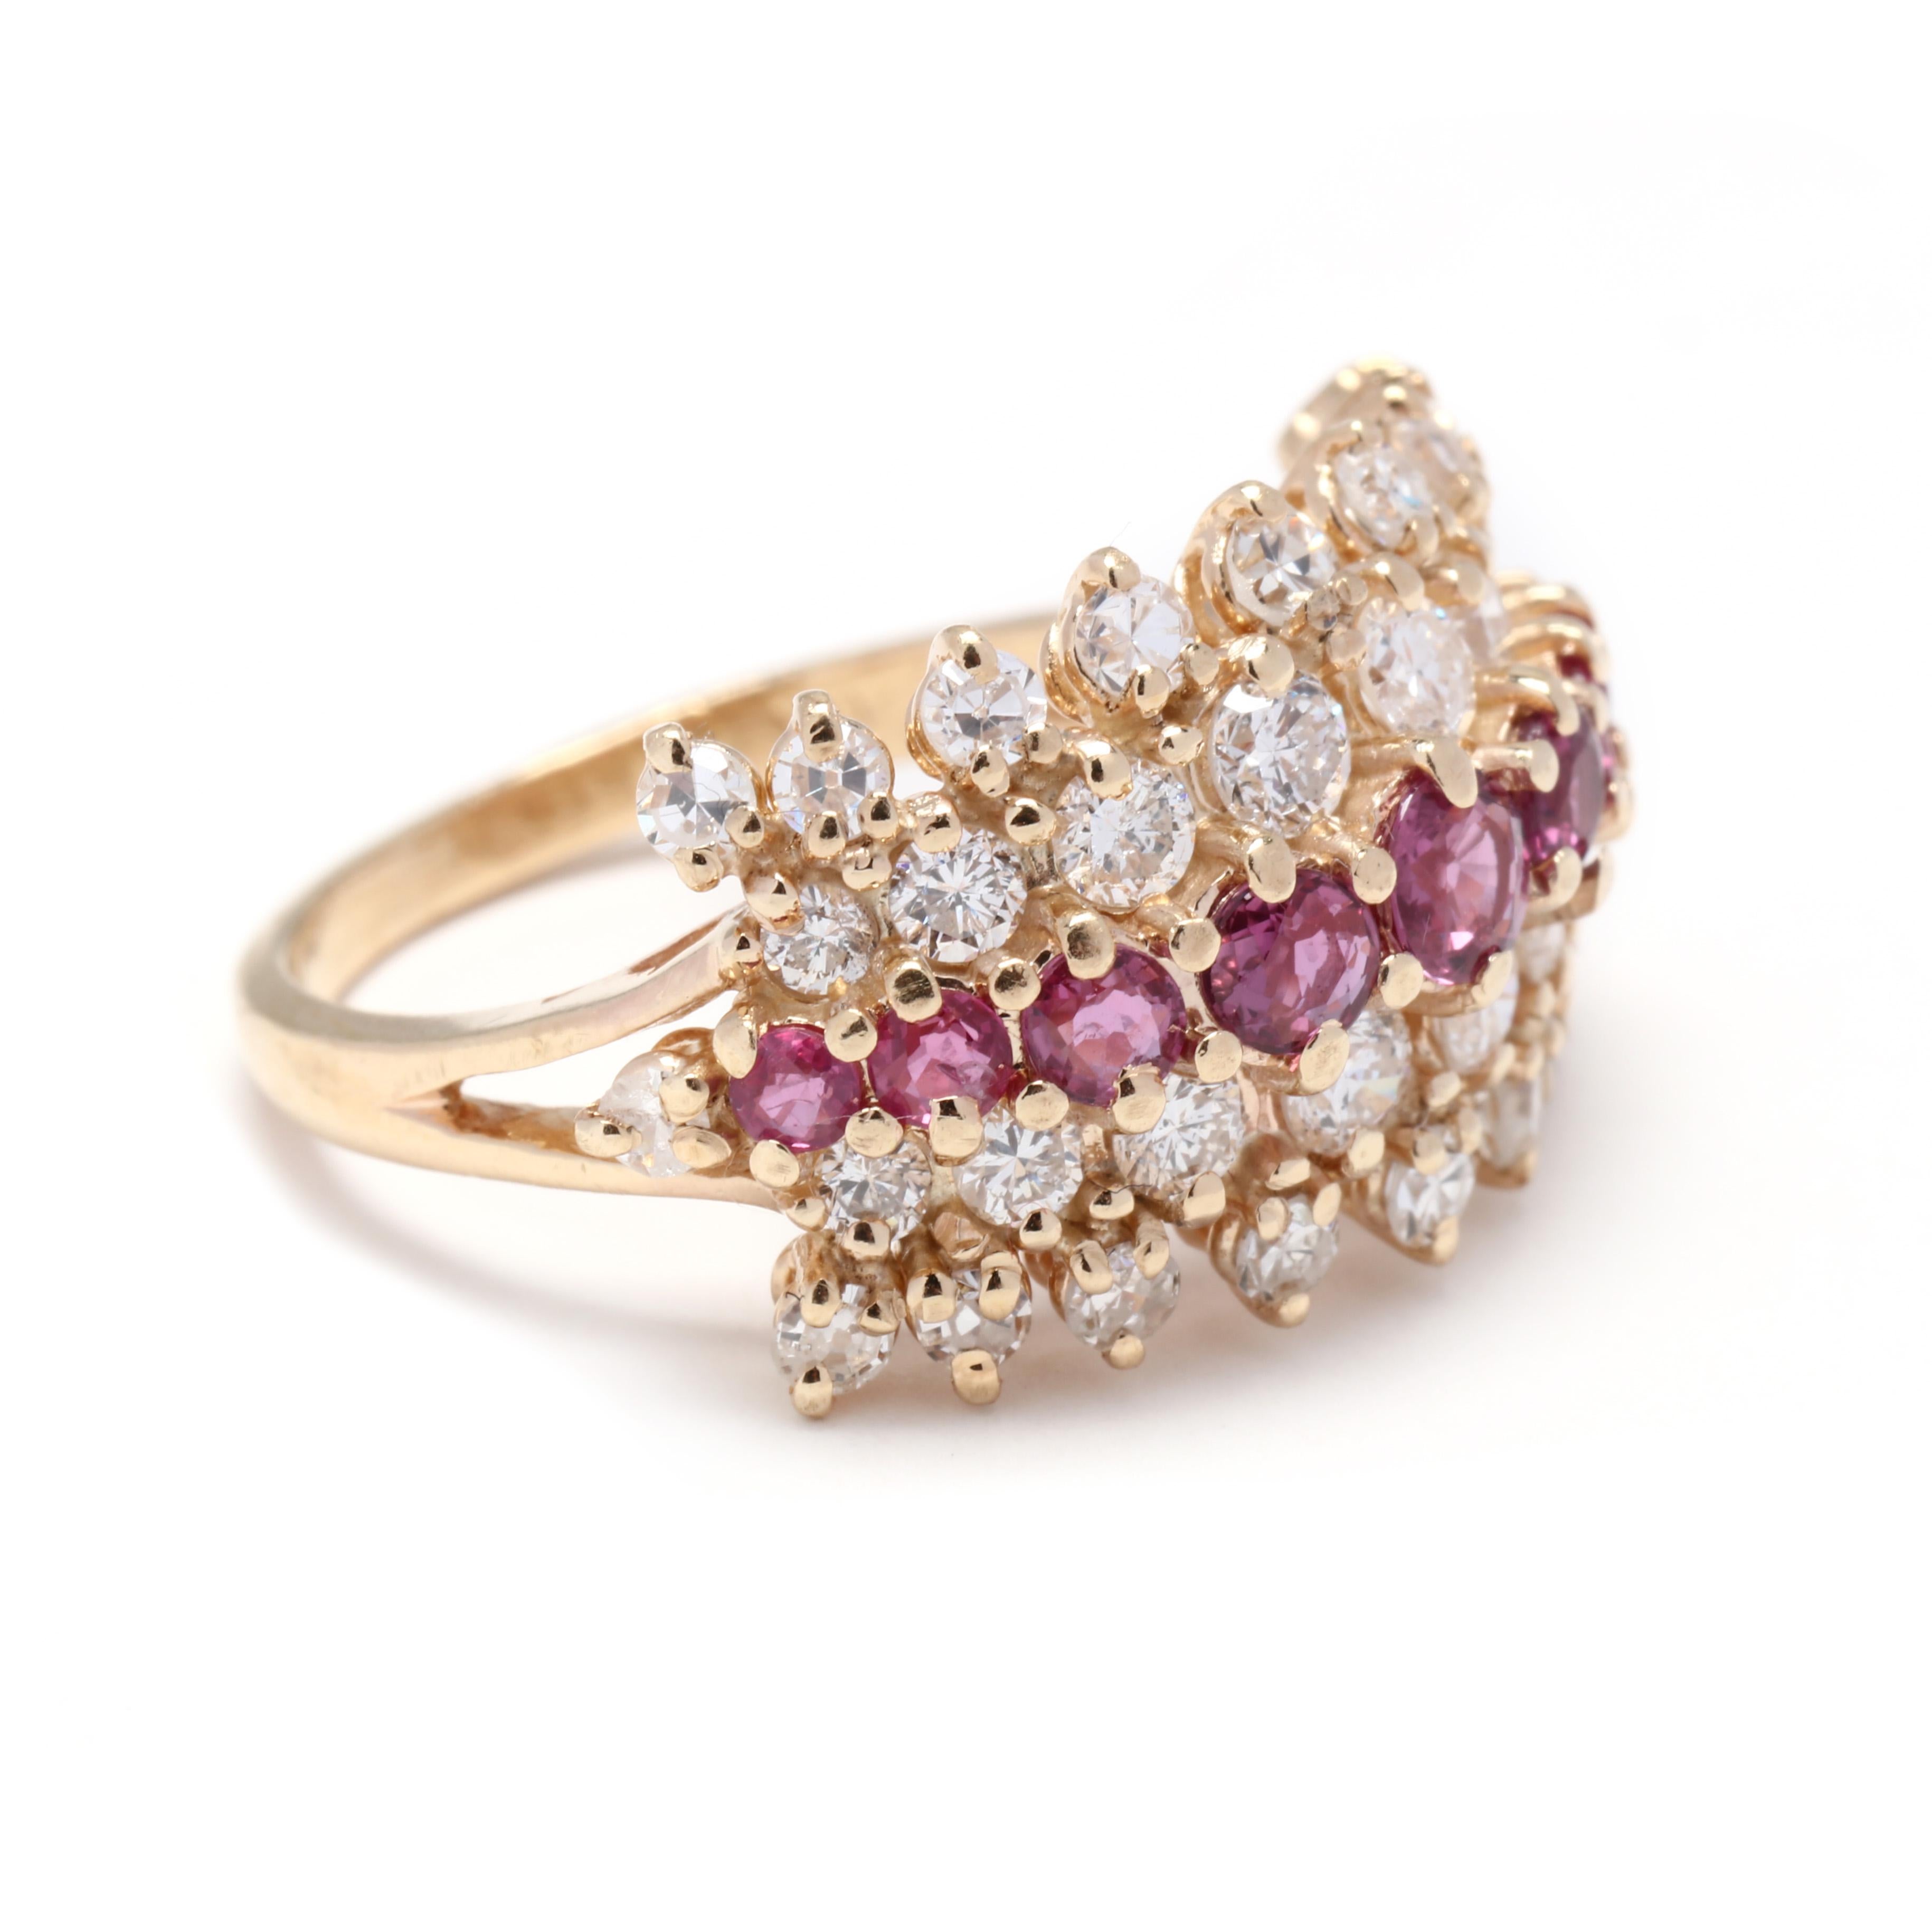 A vintage 14 karat yellow gold ruby and diamond band. This ring features a tapered center row of prong set rubies weighing approximately .89 total carats with a tapered row of round cut diamonds on either side and another row of round cut diamonds